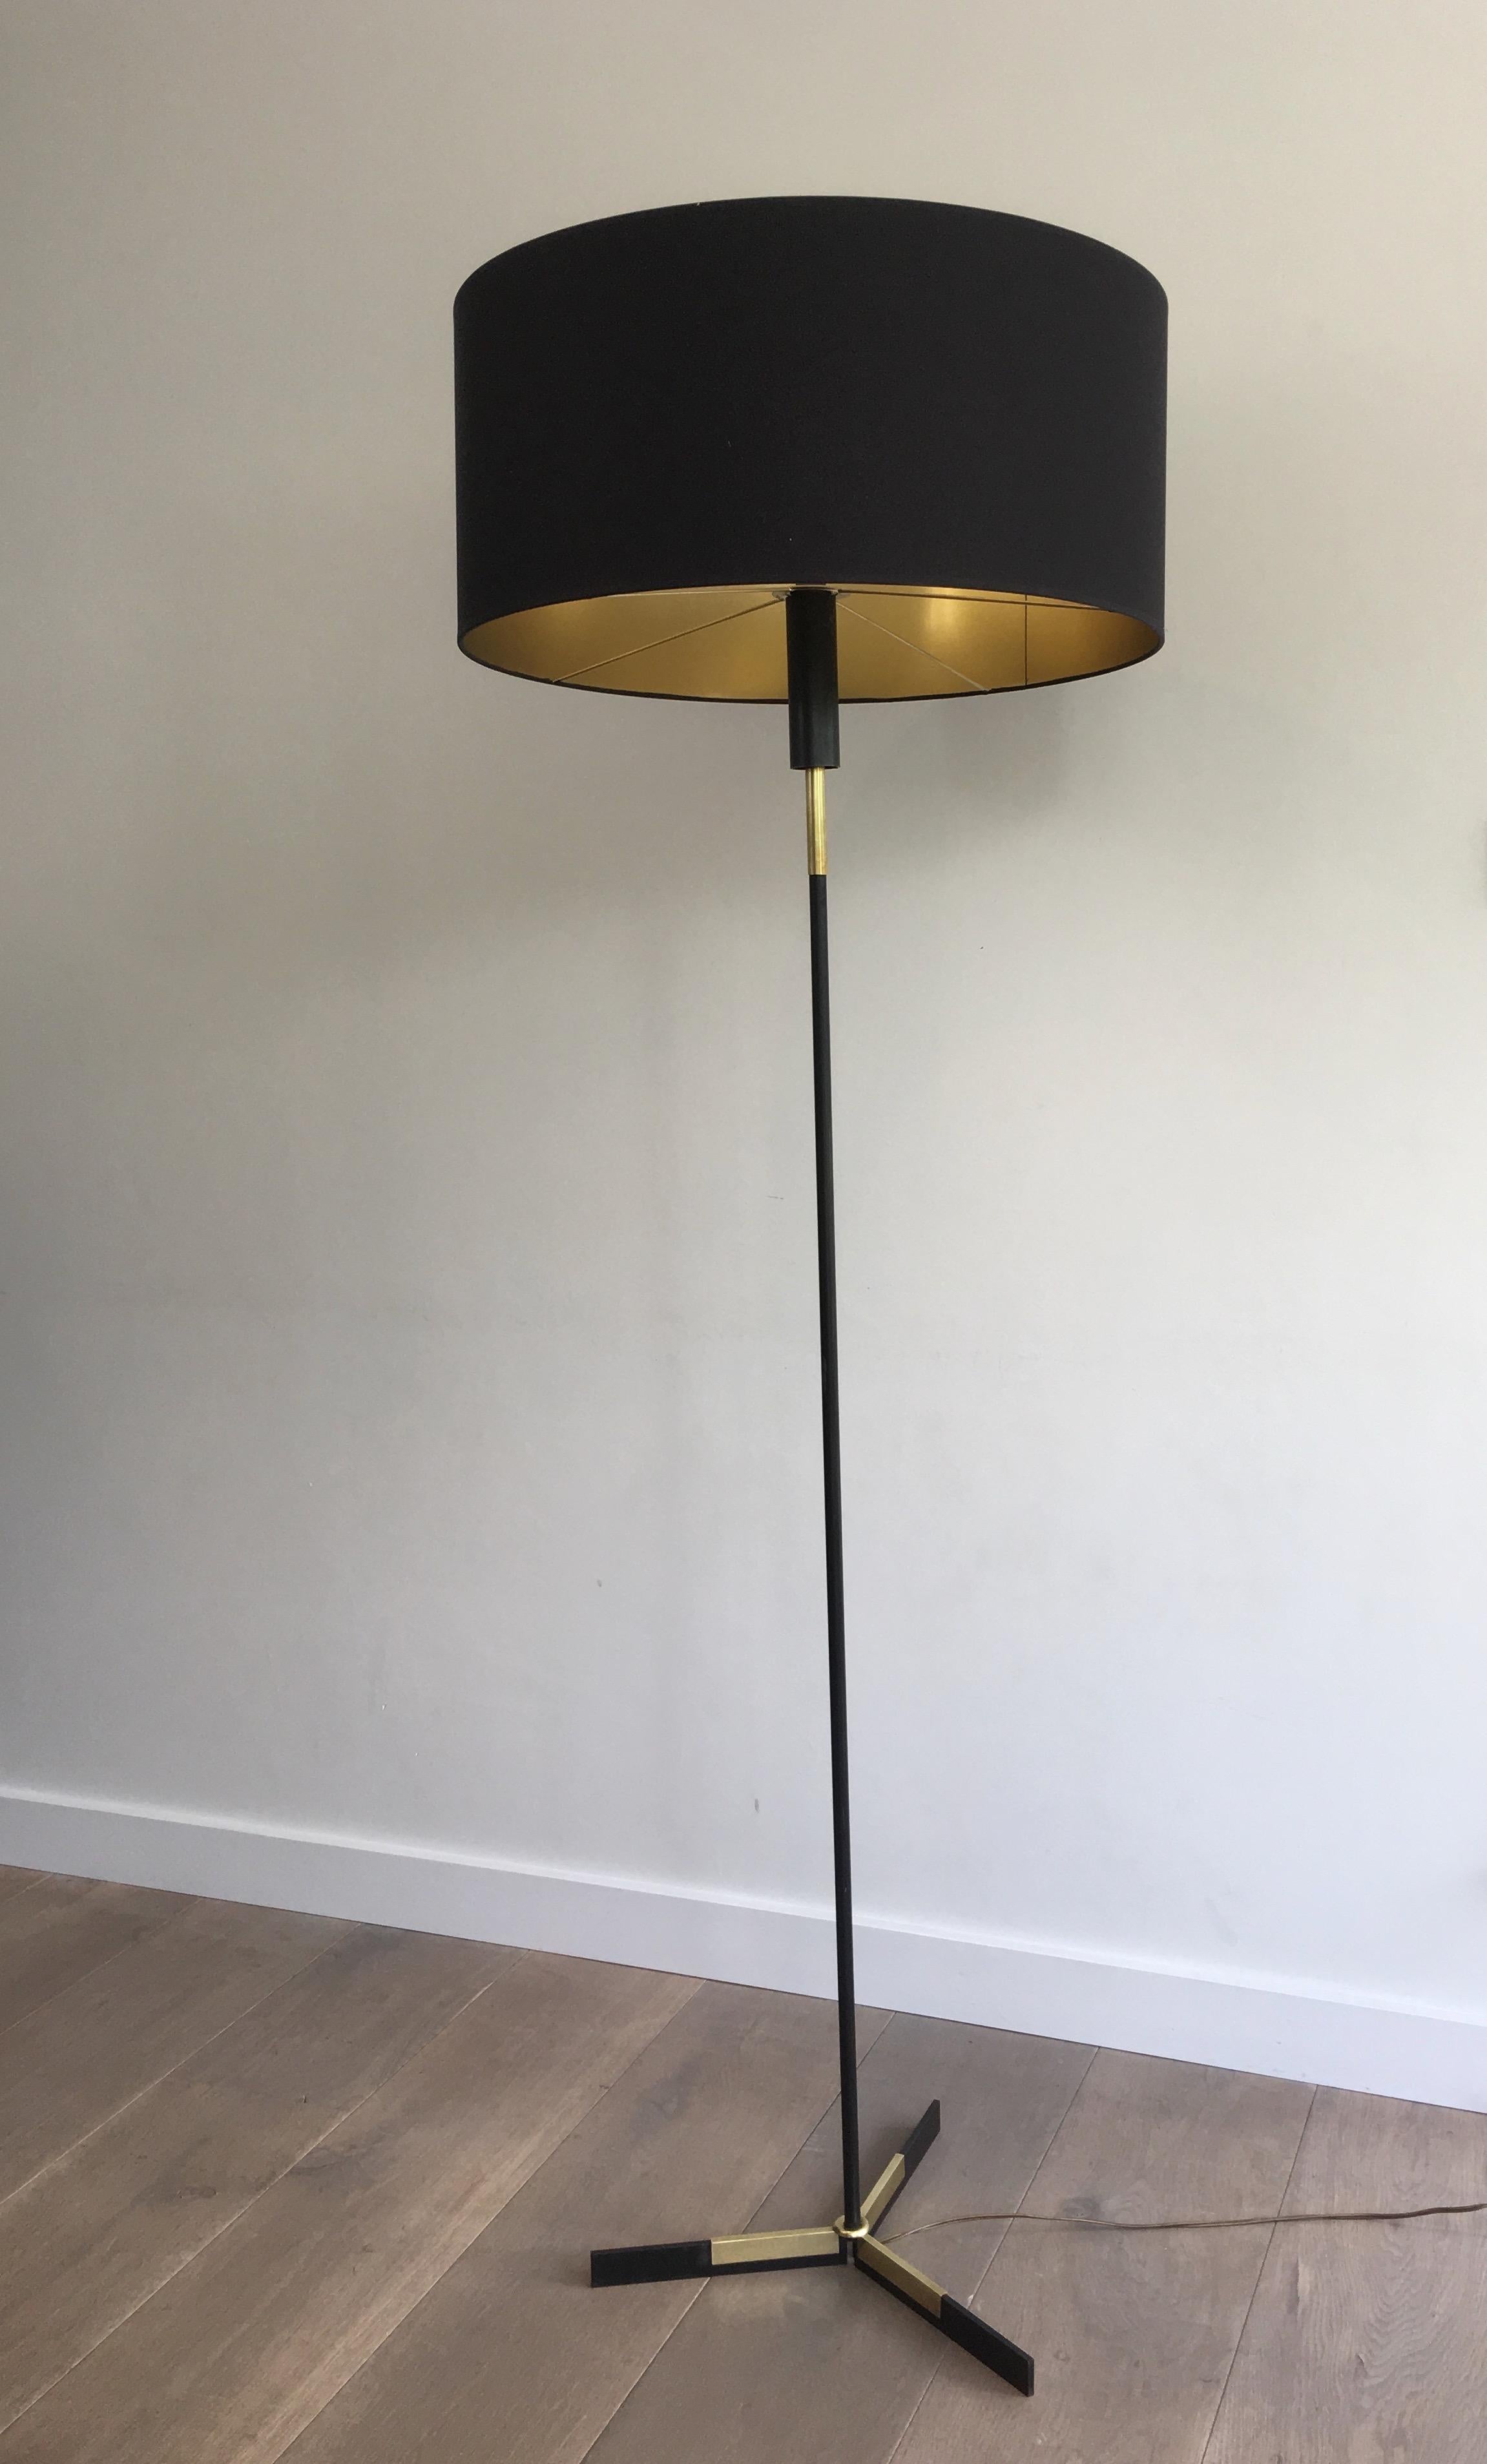 Black Lacquered and Brass Design Floor Lamp, French, circa 1950 For Sale 7